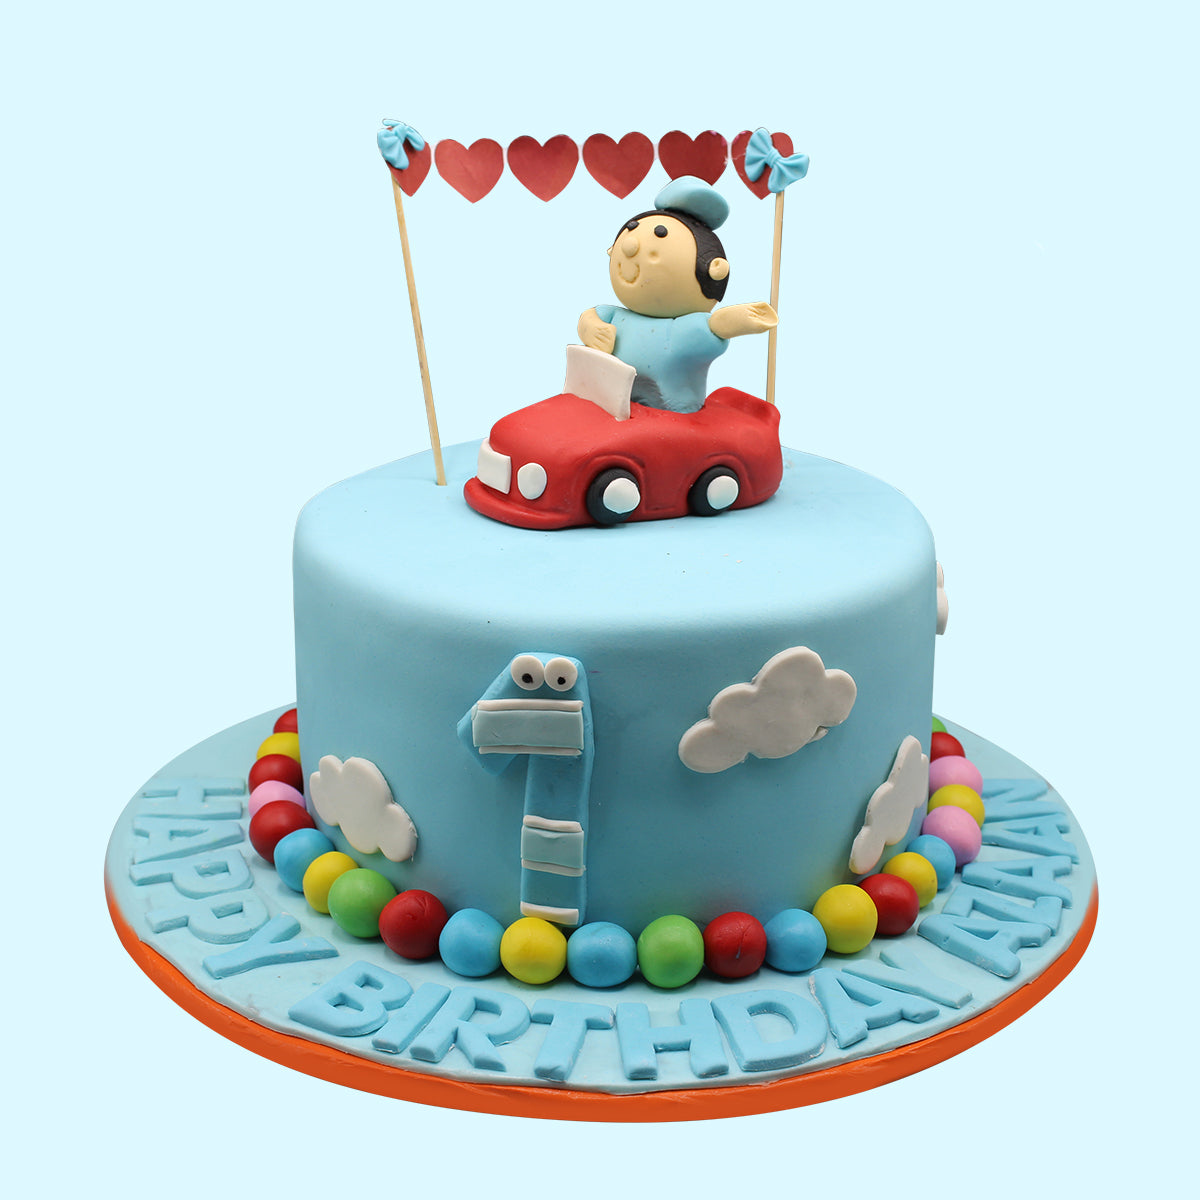 Audi Sports Car Birthday Cake With Logo For Car Lover